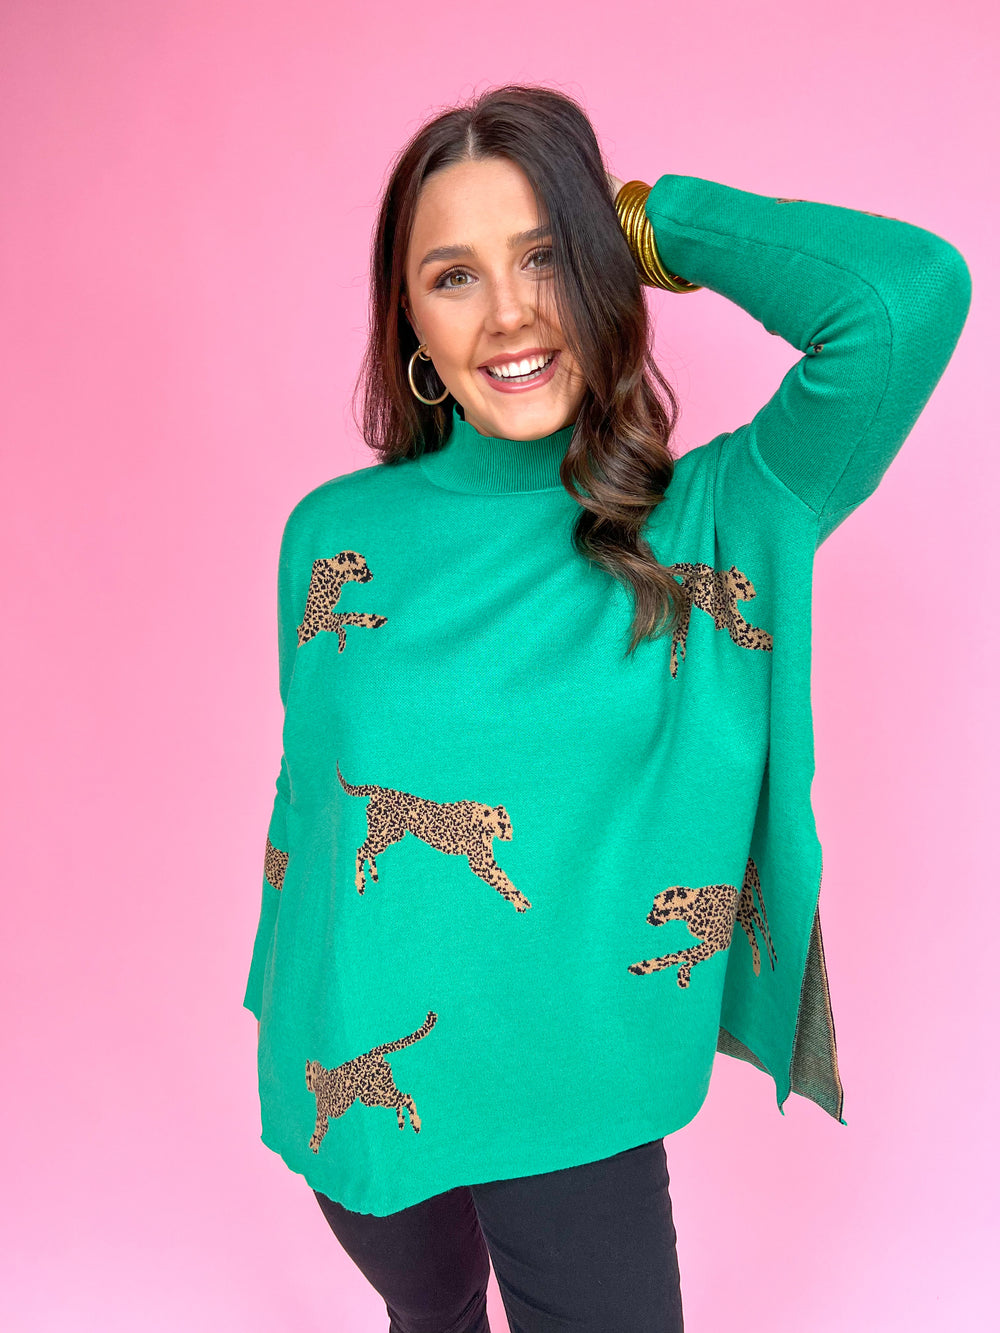 On The Catwalk Sweater - Kelly Green